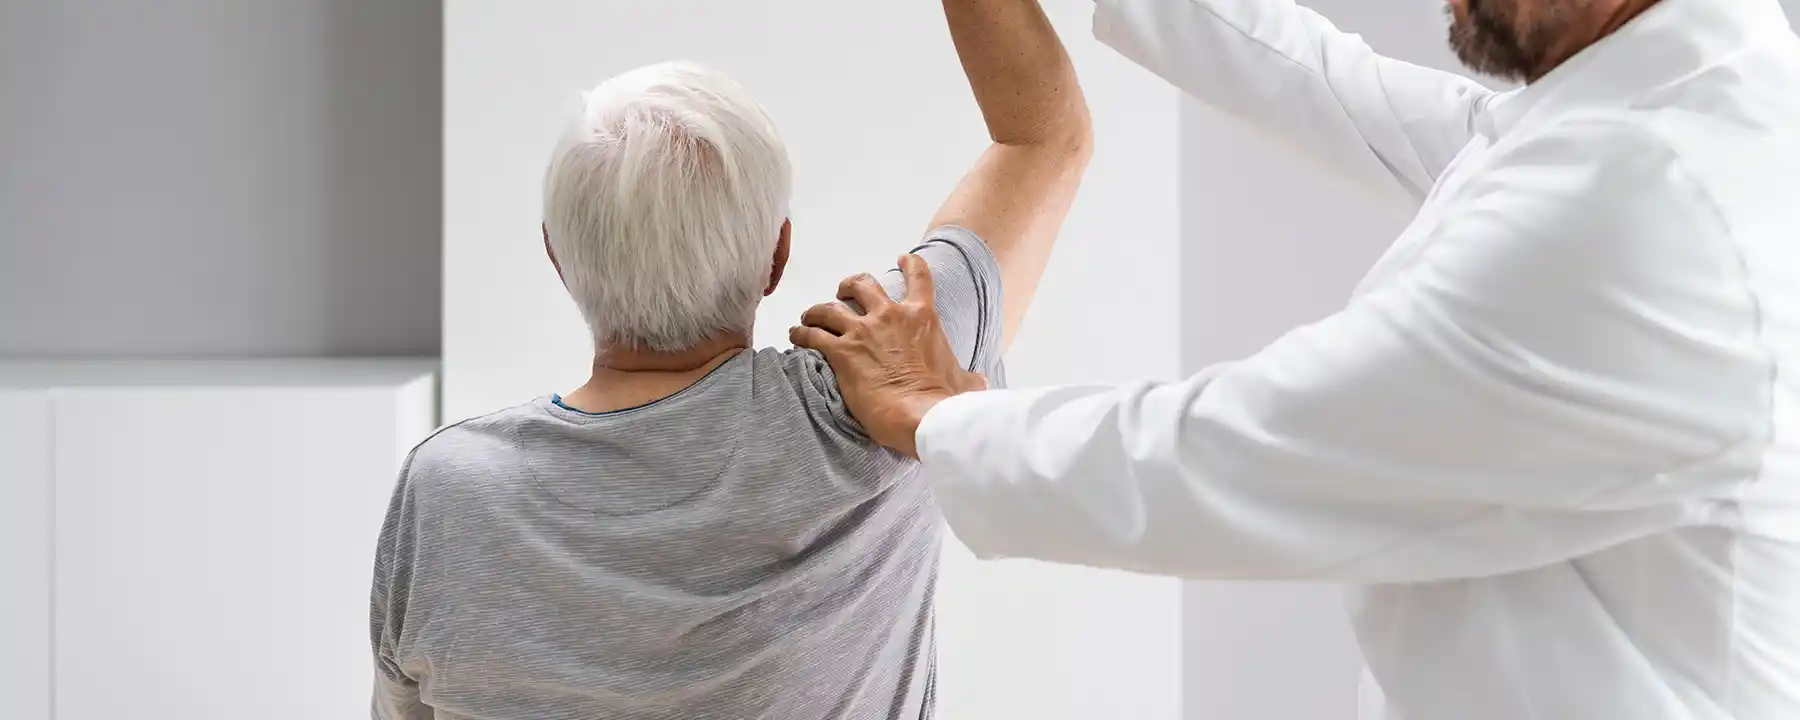 In Turkey, movement disorders neurosurgery offers advanced treatments for conditions such as Parkinson's disease, essential tremor, and dystonia.